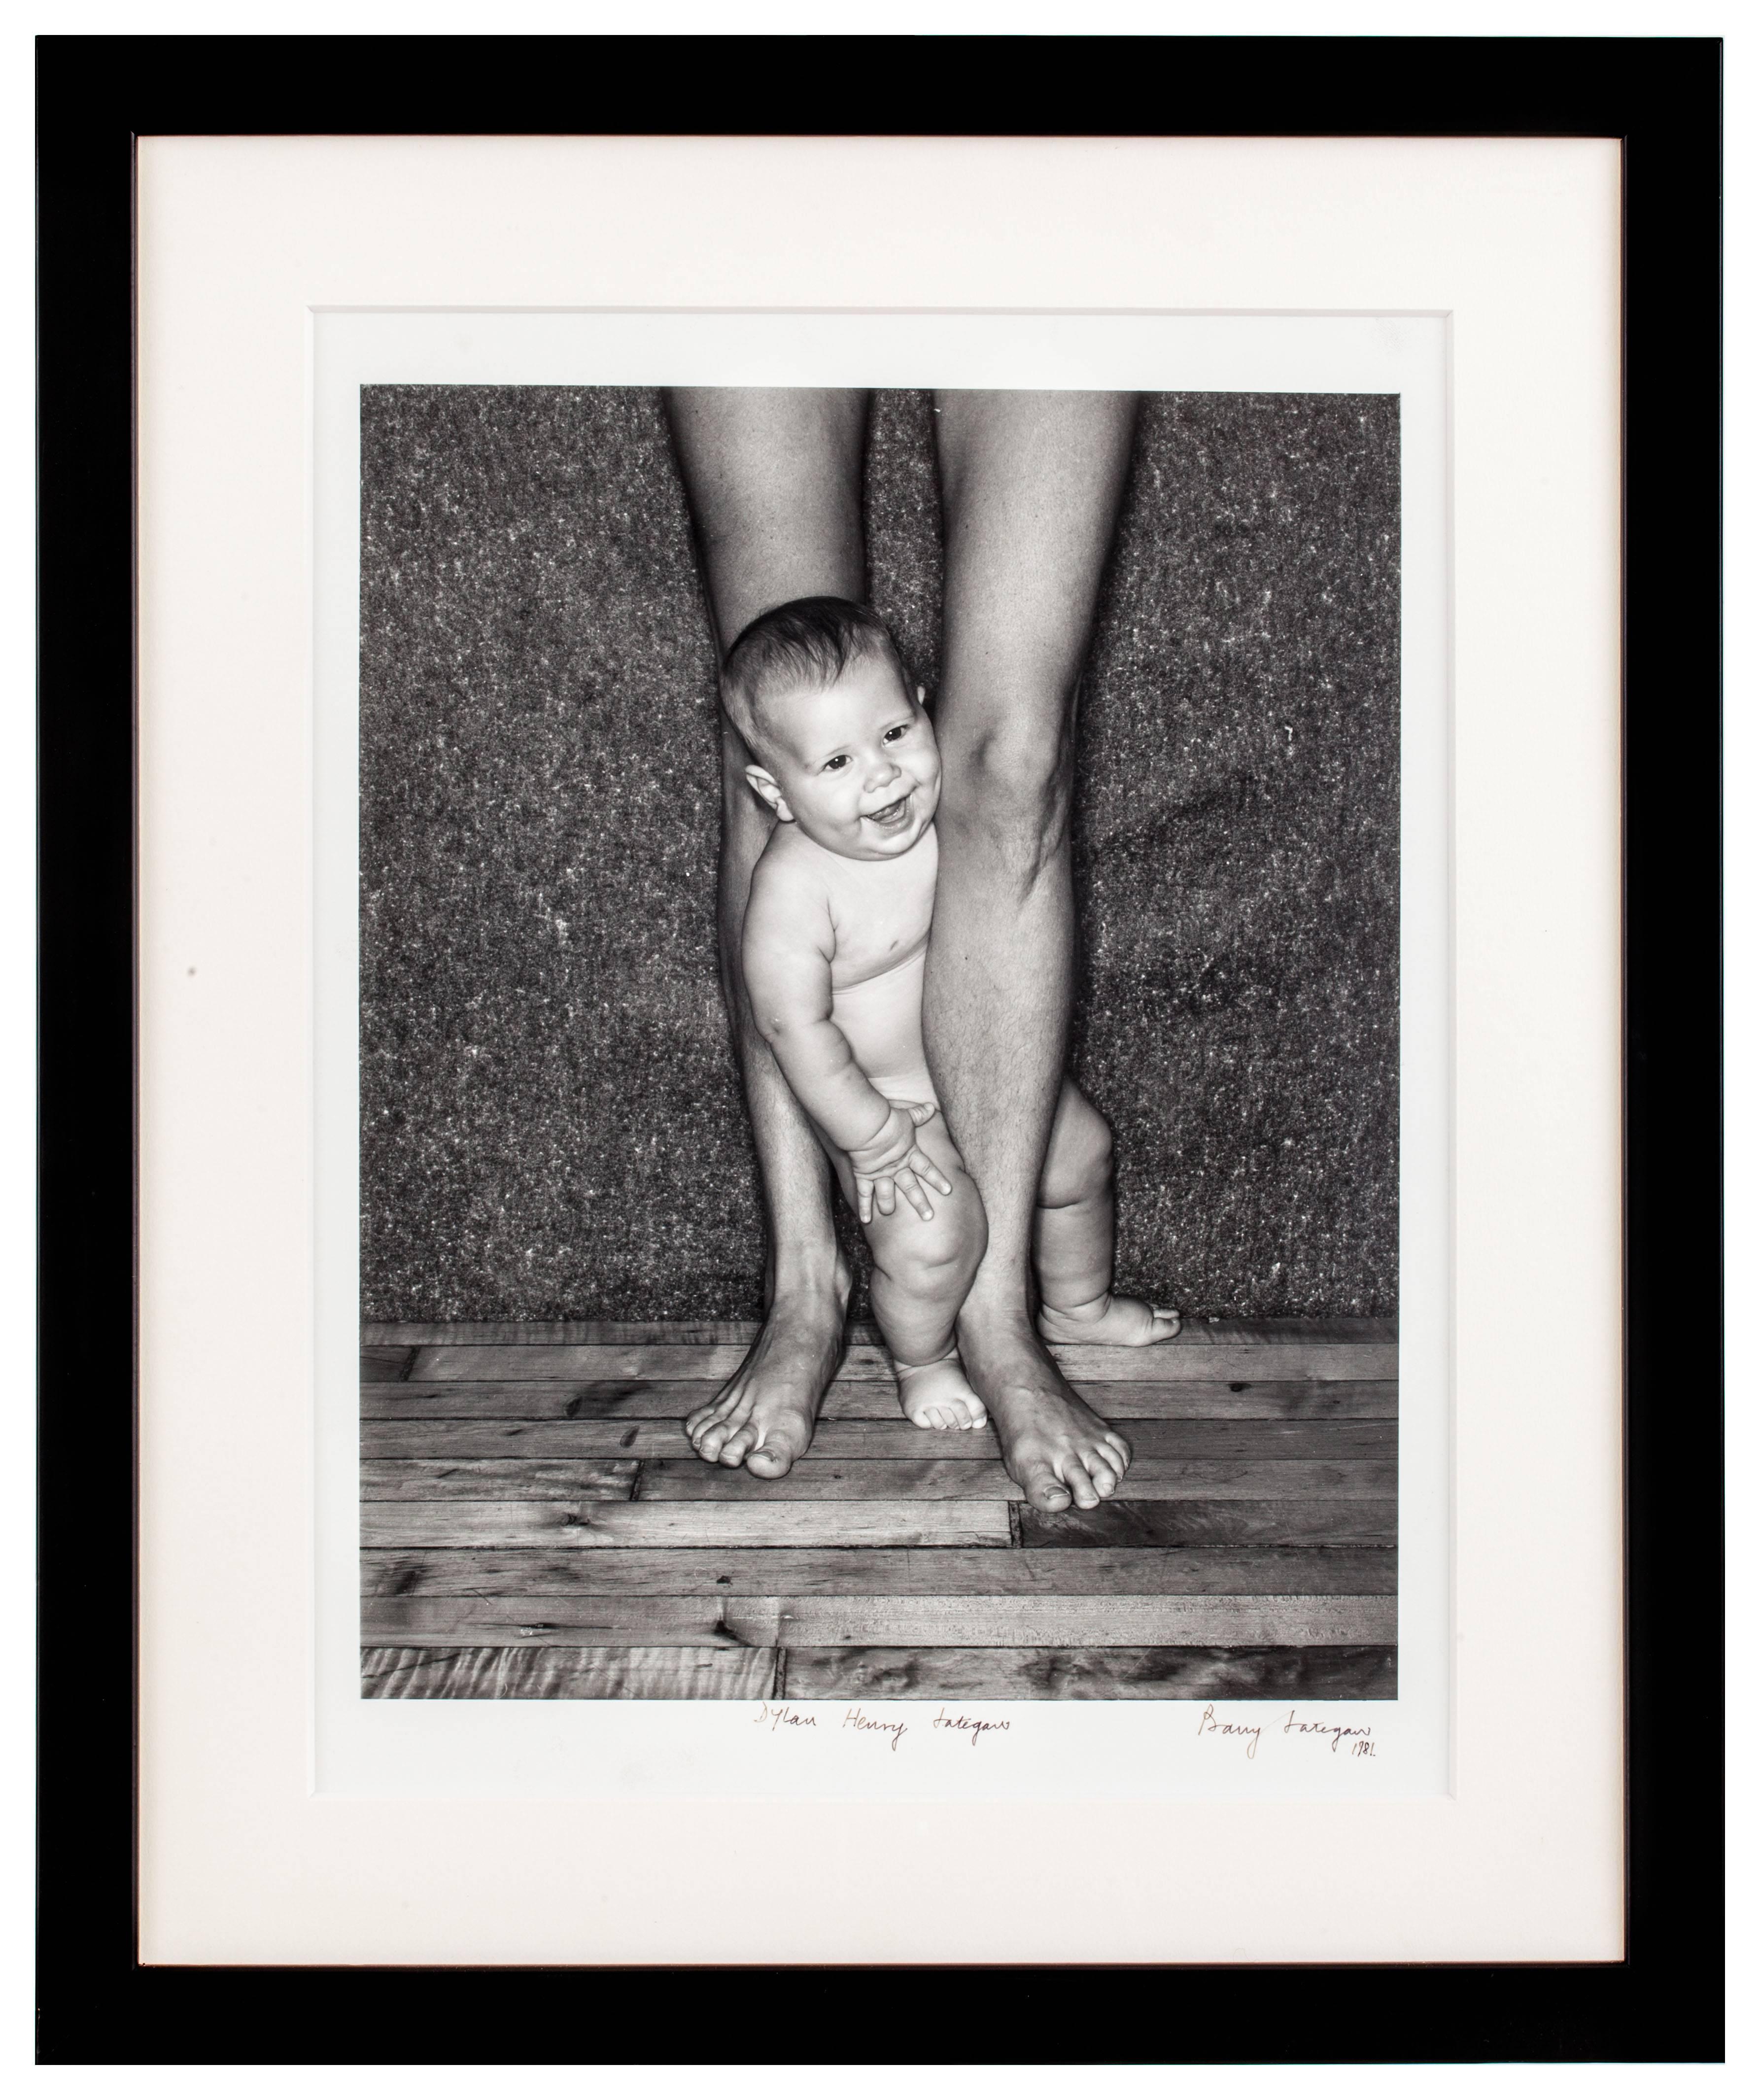 Barry Lategan Black and White Photograph - Dylan Henry Lategan. Black & white photography, mom and son portrait, 1981.